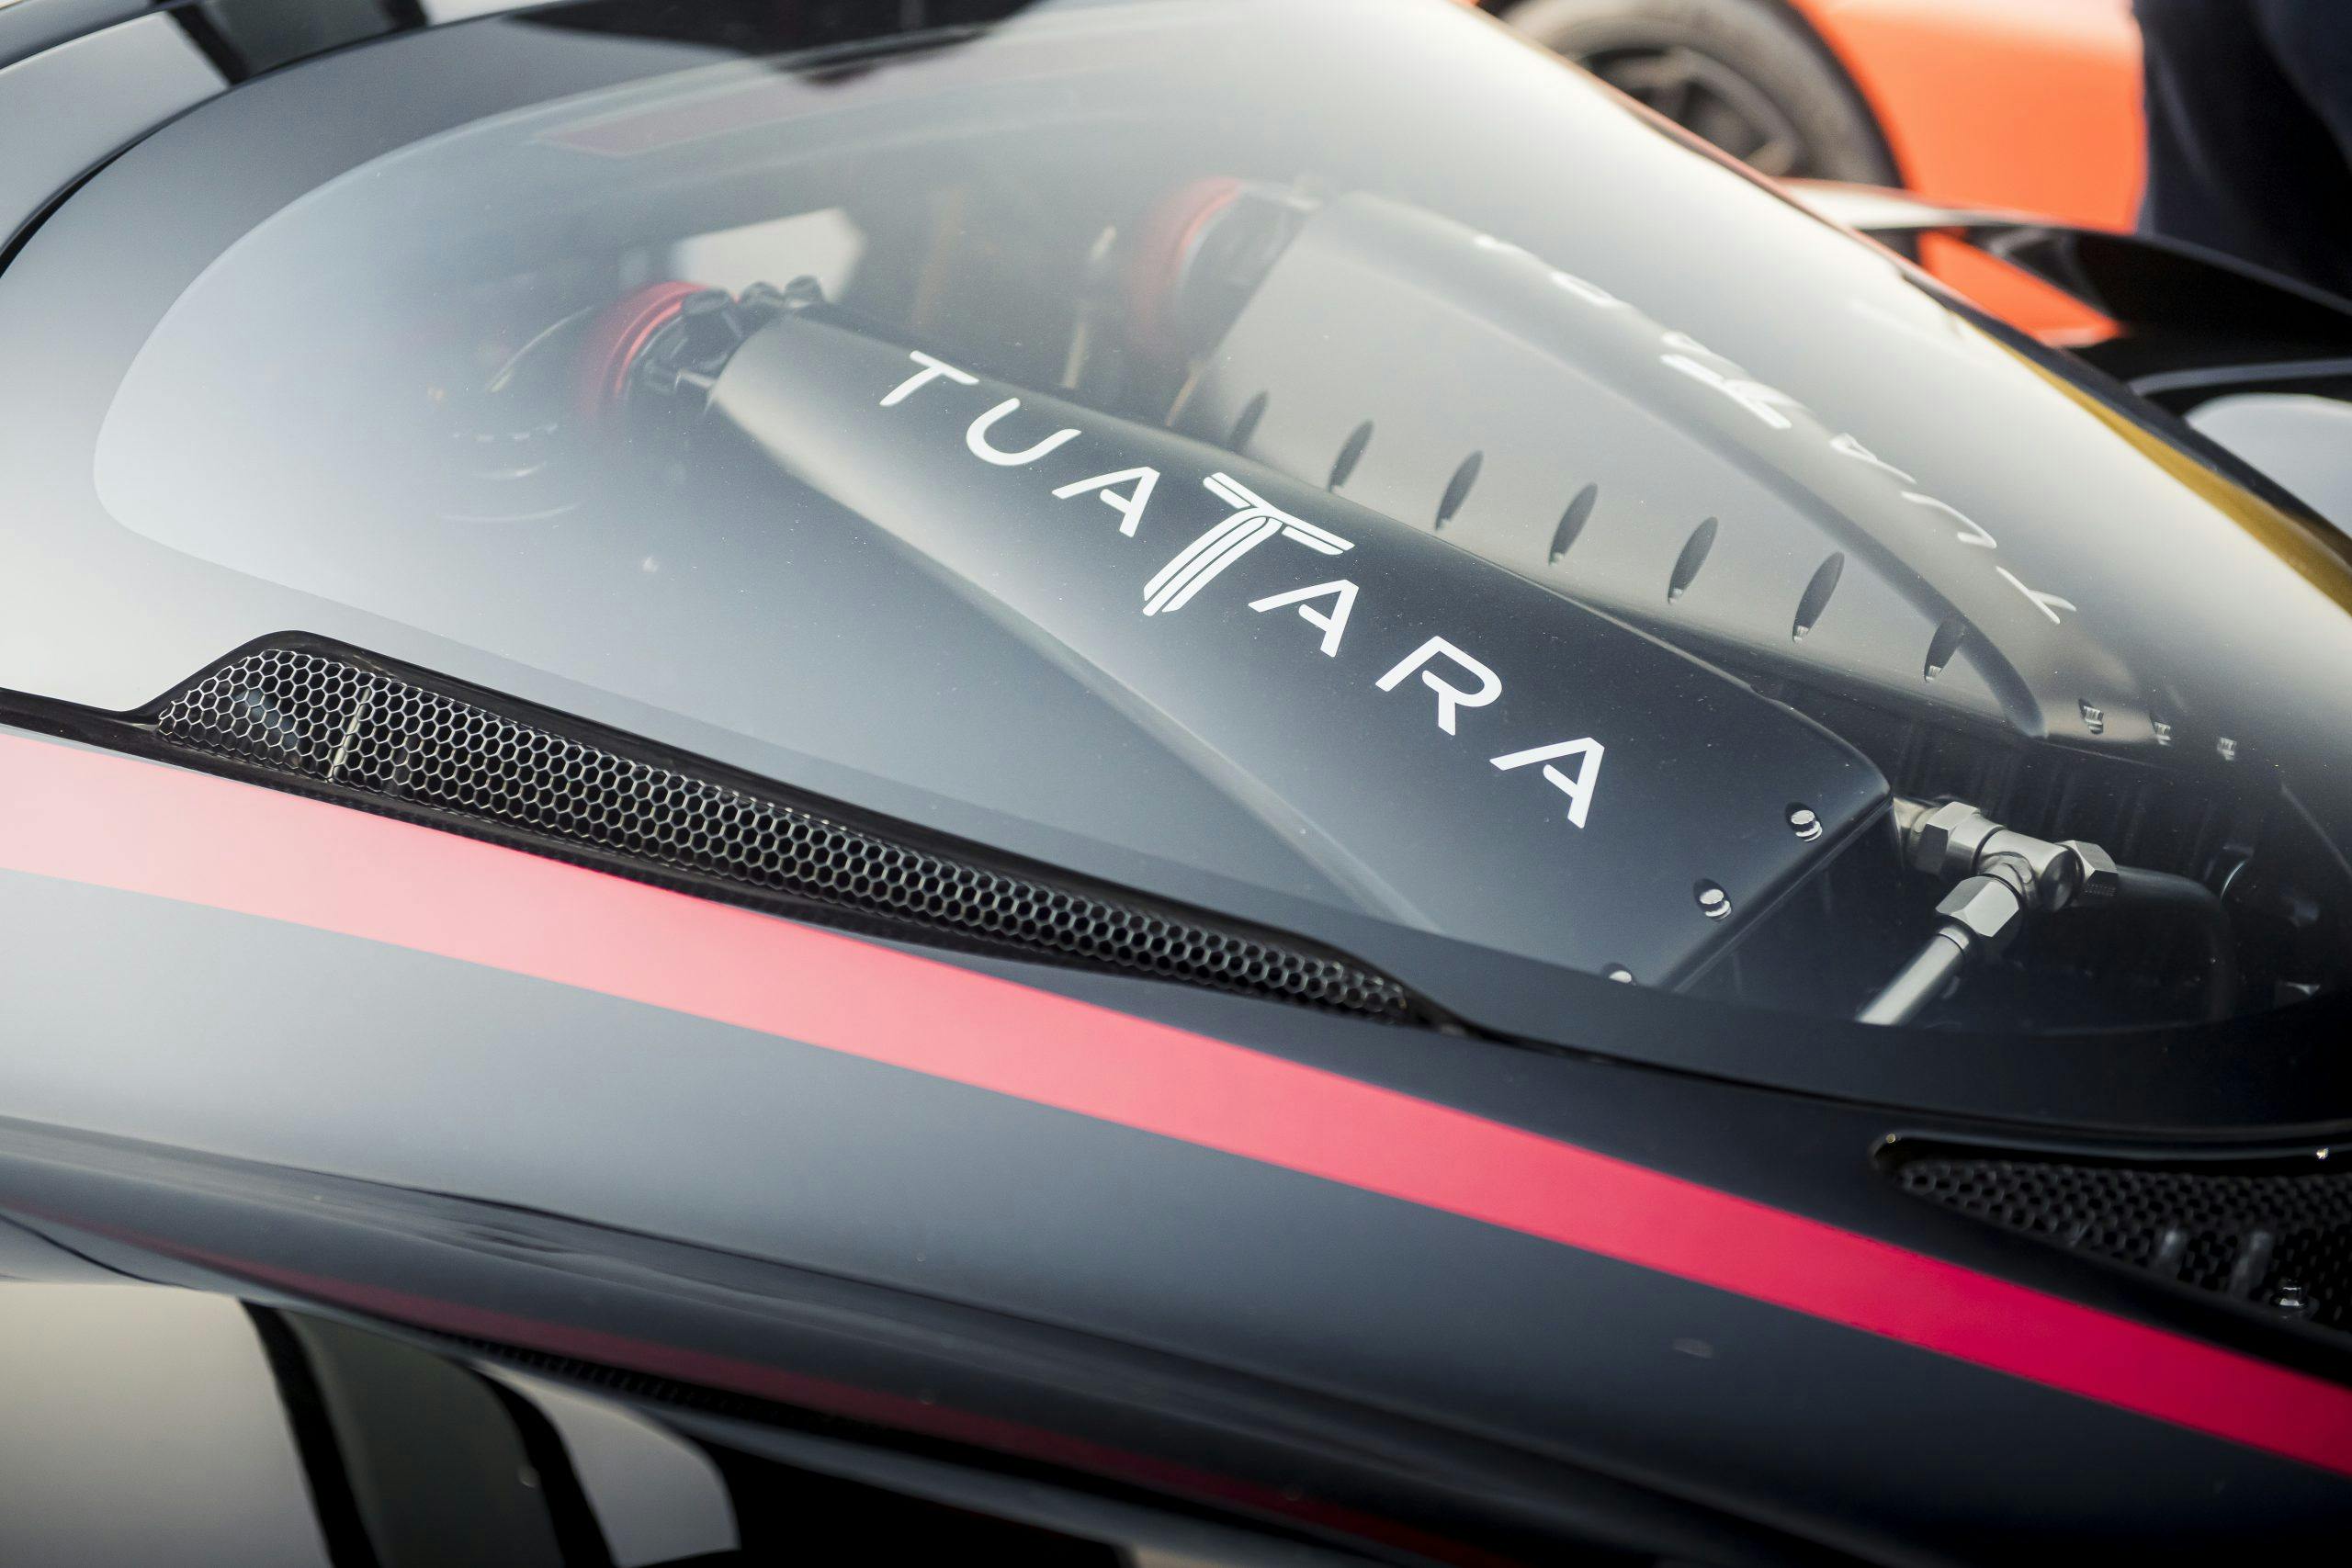 SSC Tuatara Production Car Speed Record engine cover